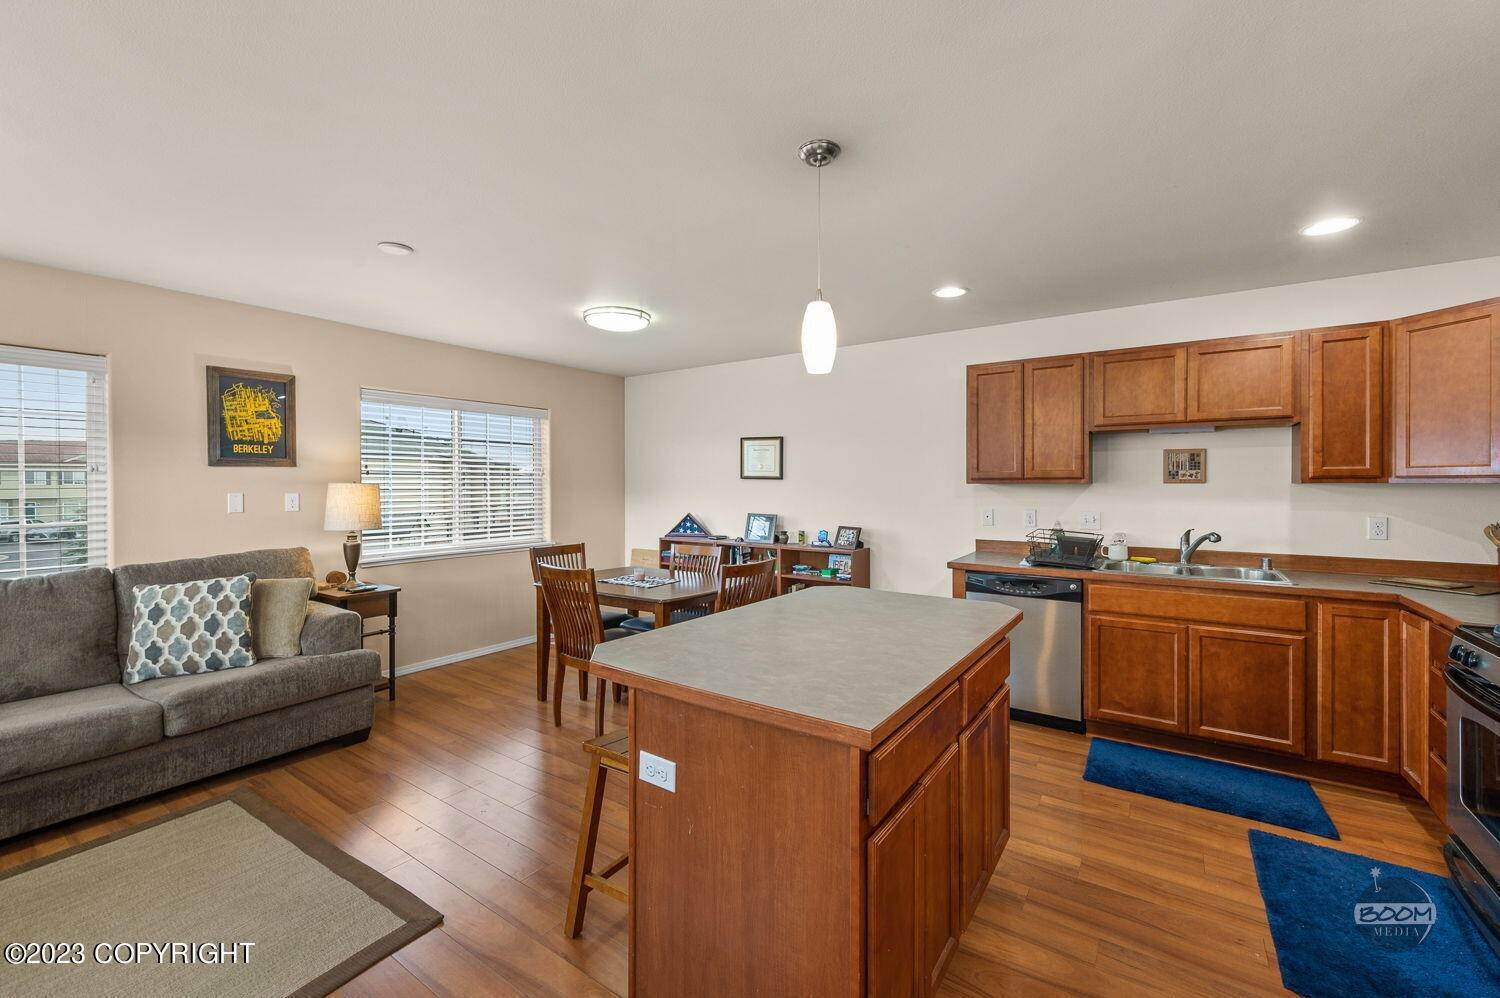 5. Condominiums for Sale at 167 Matthew Paul Way #24 Anchorage, Alaska 99504 United States